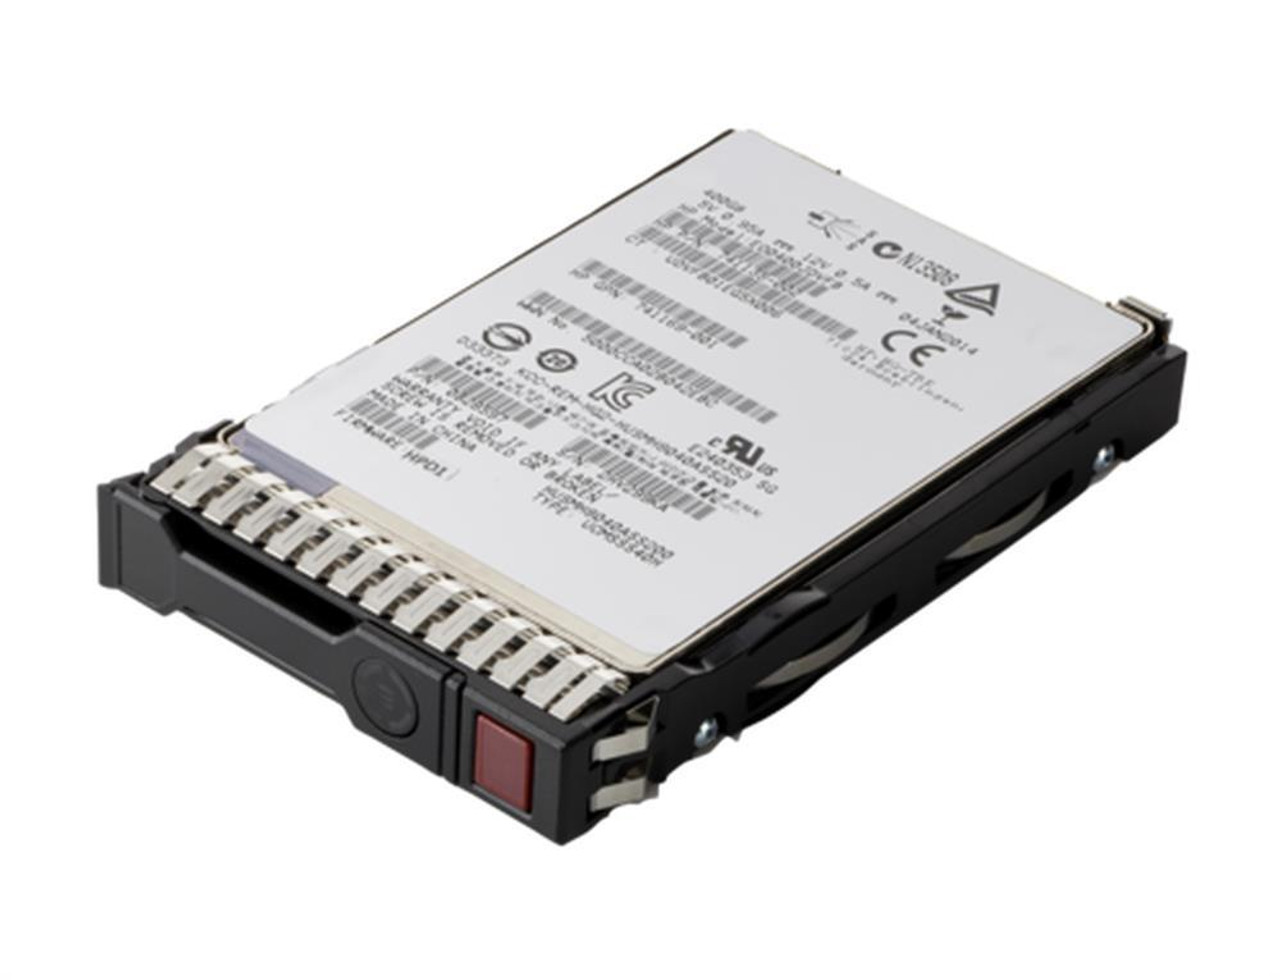 P06609-H21#0D1 HPE 960GB (2 x 480GB) SATA 6Gbps 2.5-inch Internal Solid State Drive (SSD) with Smart Carrier M.2